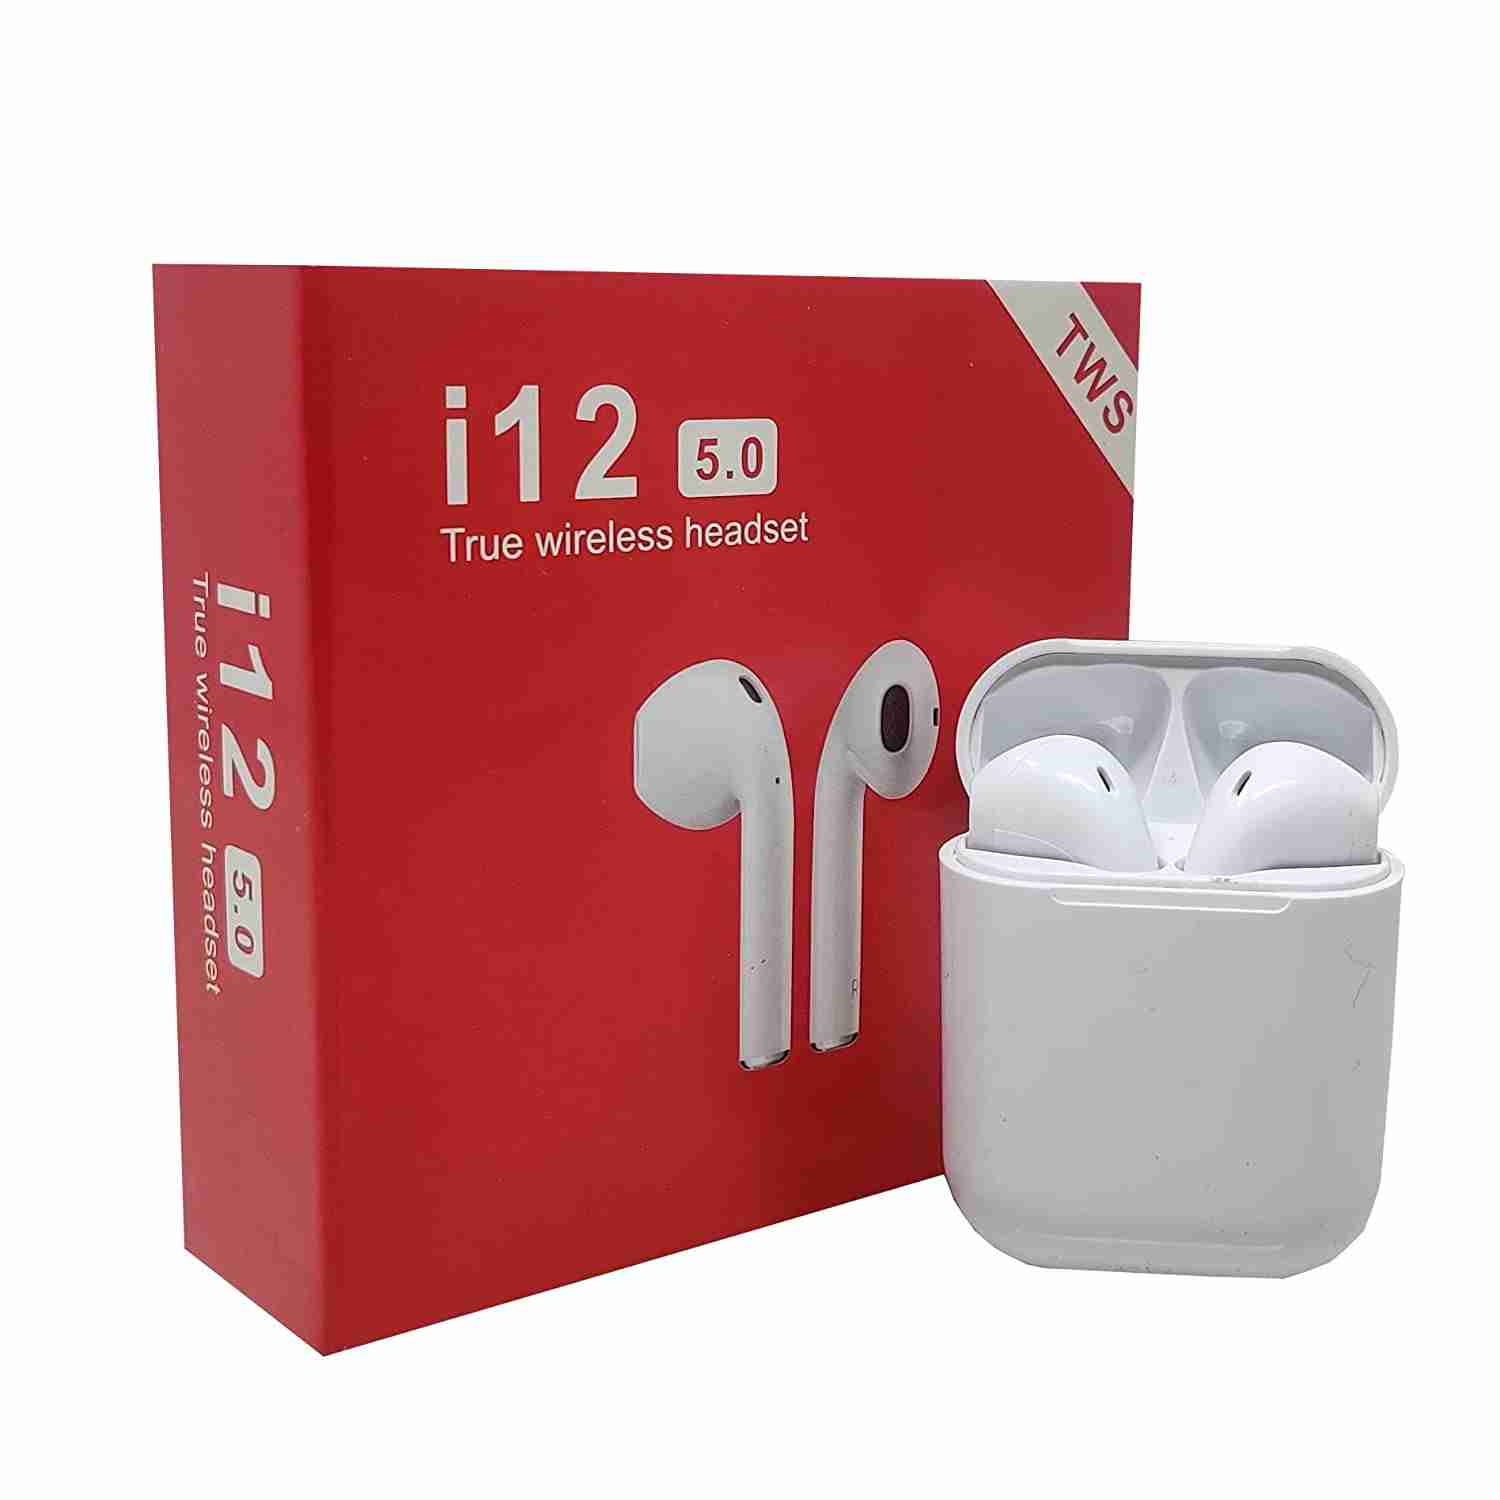 i12 5.0 True Wireless Headset in Ear Earbuds with Mic and Touch Sensor, New Packaging, Pack of 1 